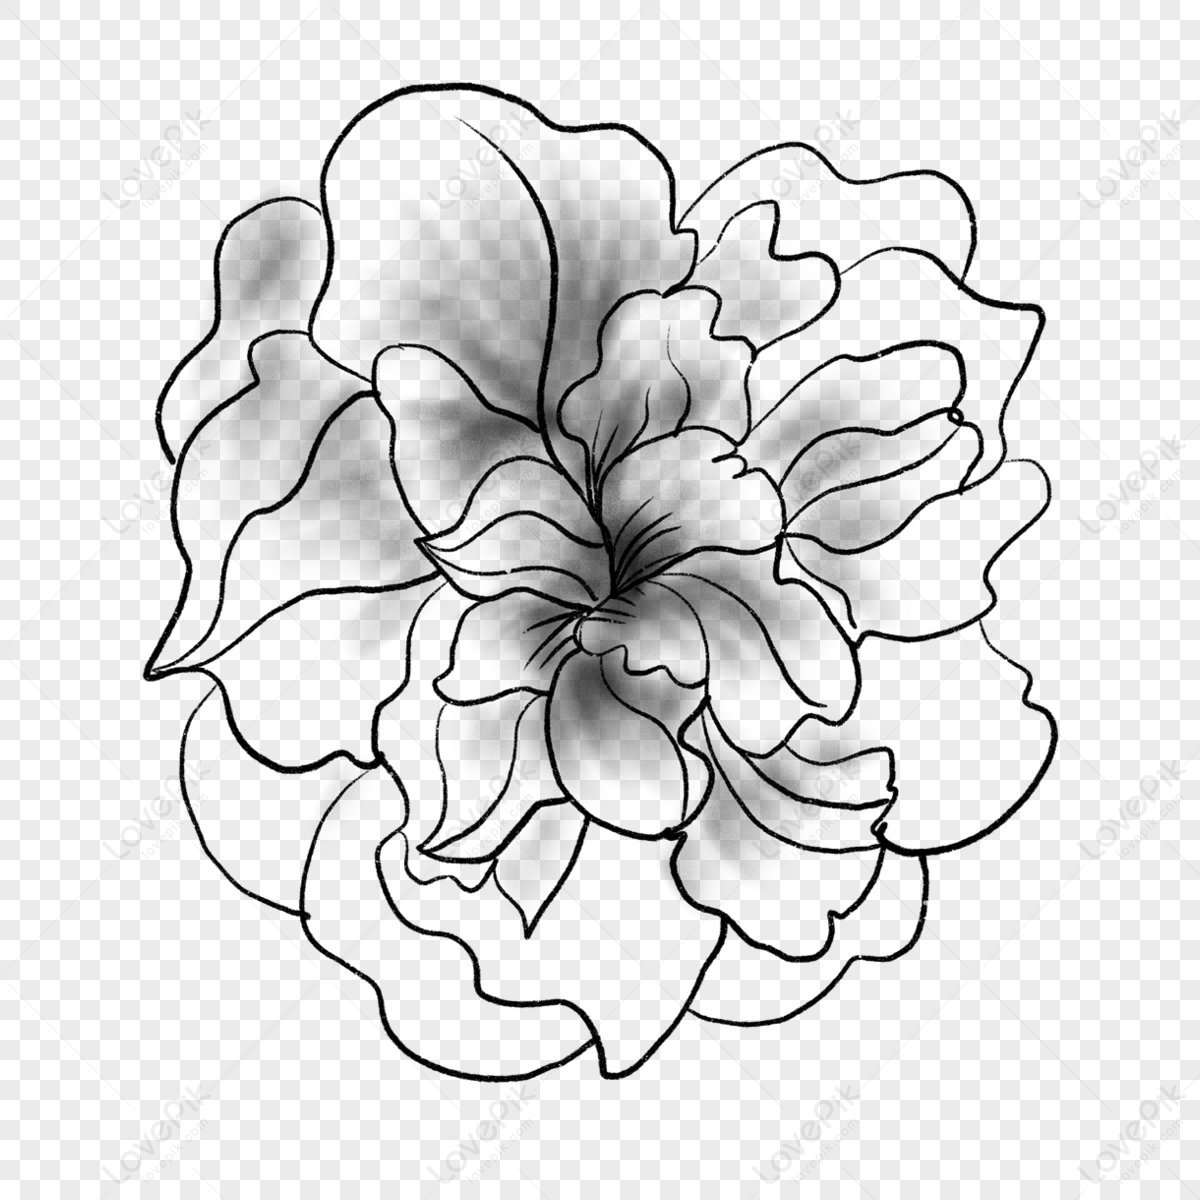 Drawing Flower Watercolor Black White - Flowers Black And White Drawing, HD  Png Download , Transparent Png Image - PNGitem